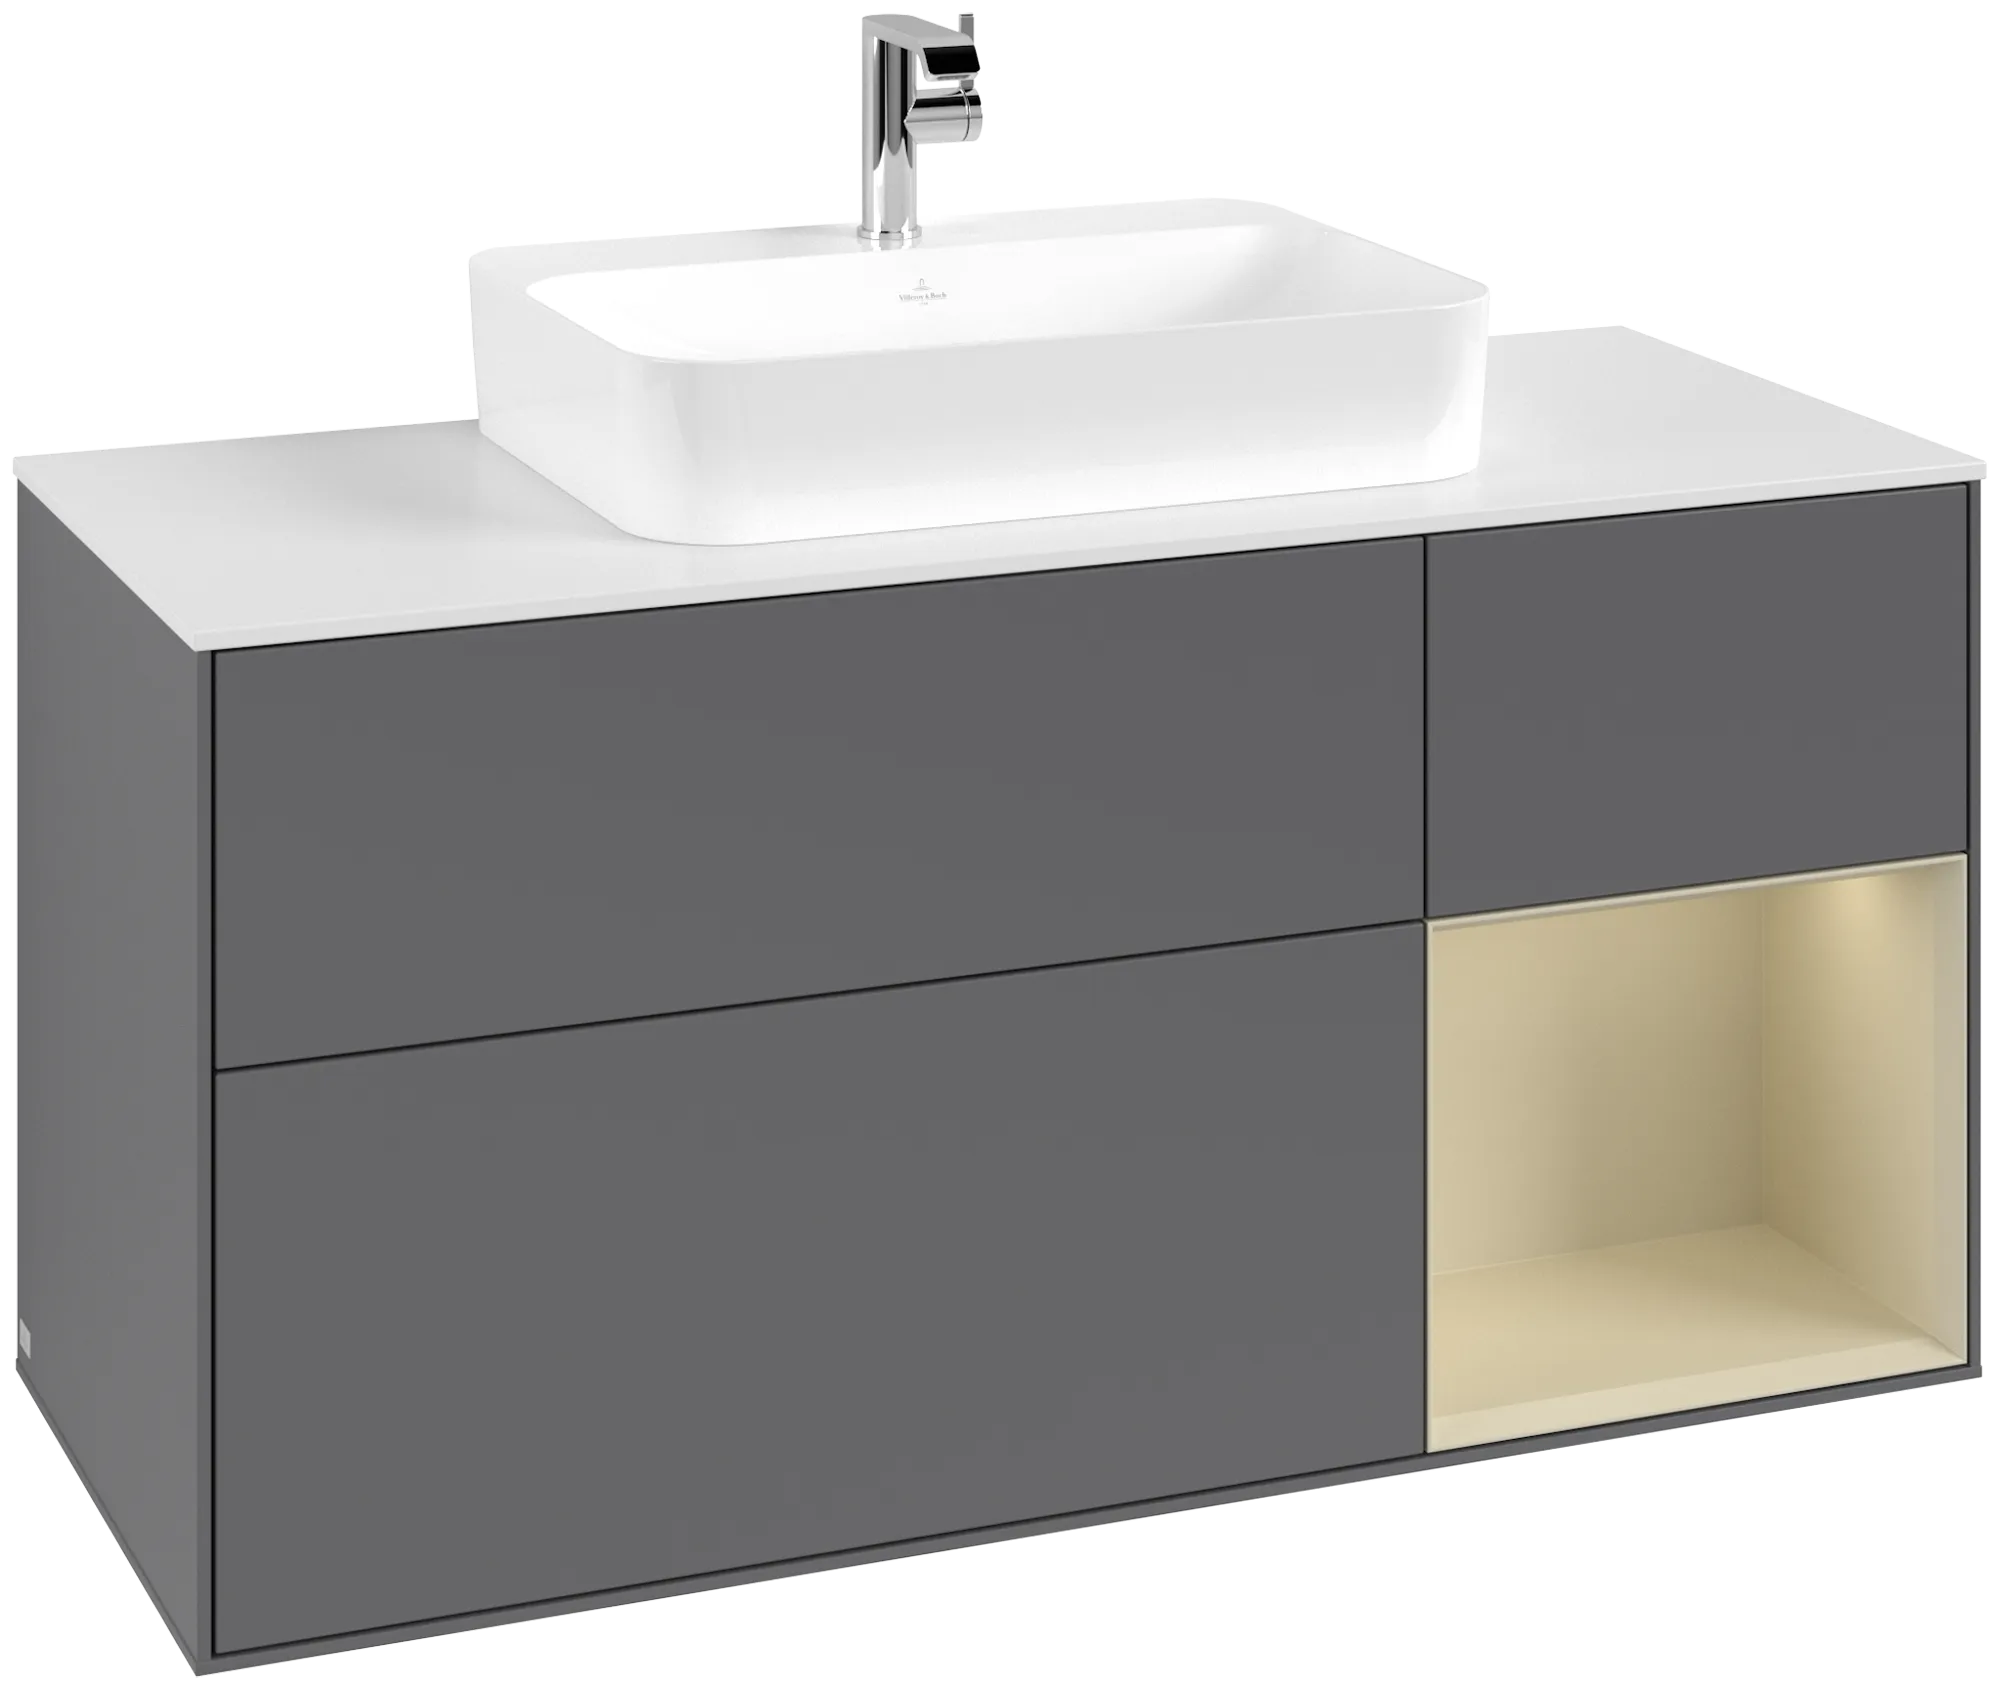 Picture of VILLEROY BOCH Finion Vanity unit, with lighting, 3 pull-out compartments, 1200 x 603 x 501 mm, Anthracite Matt Lacquer / Silk Grey Matt Lacquer / Glass White Matt #G421HJGK